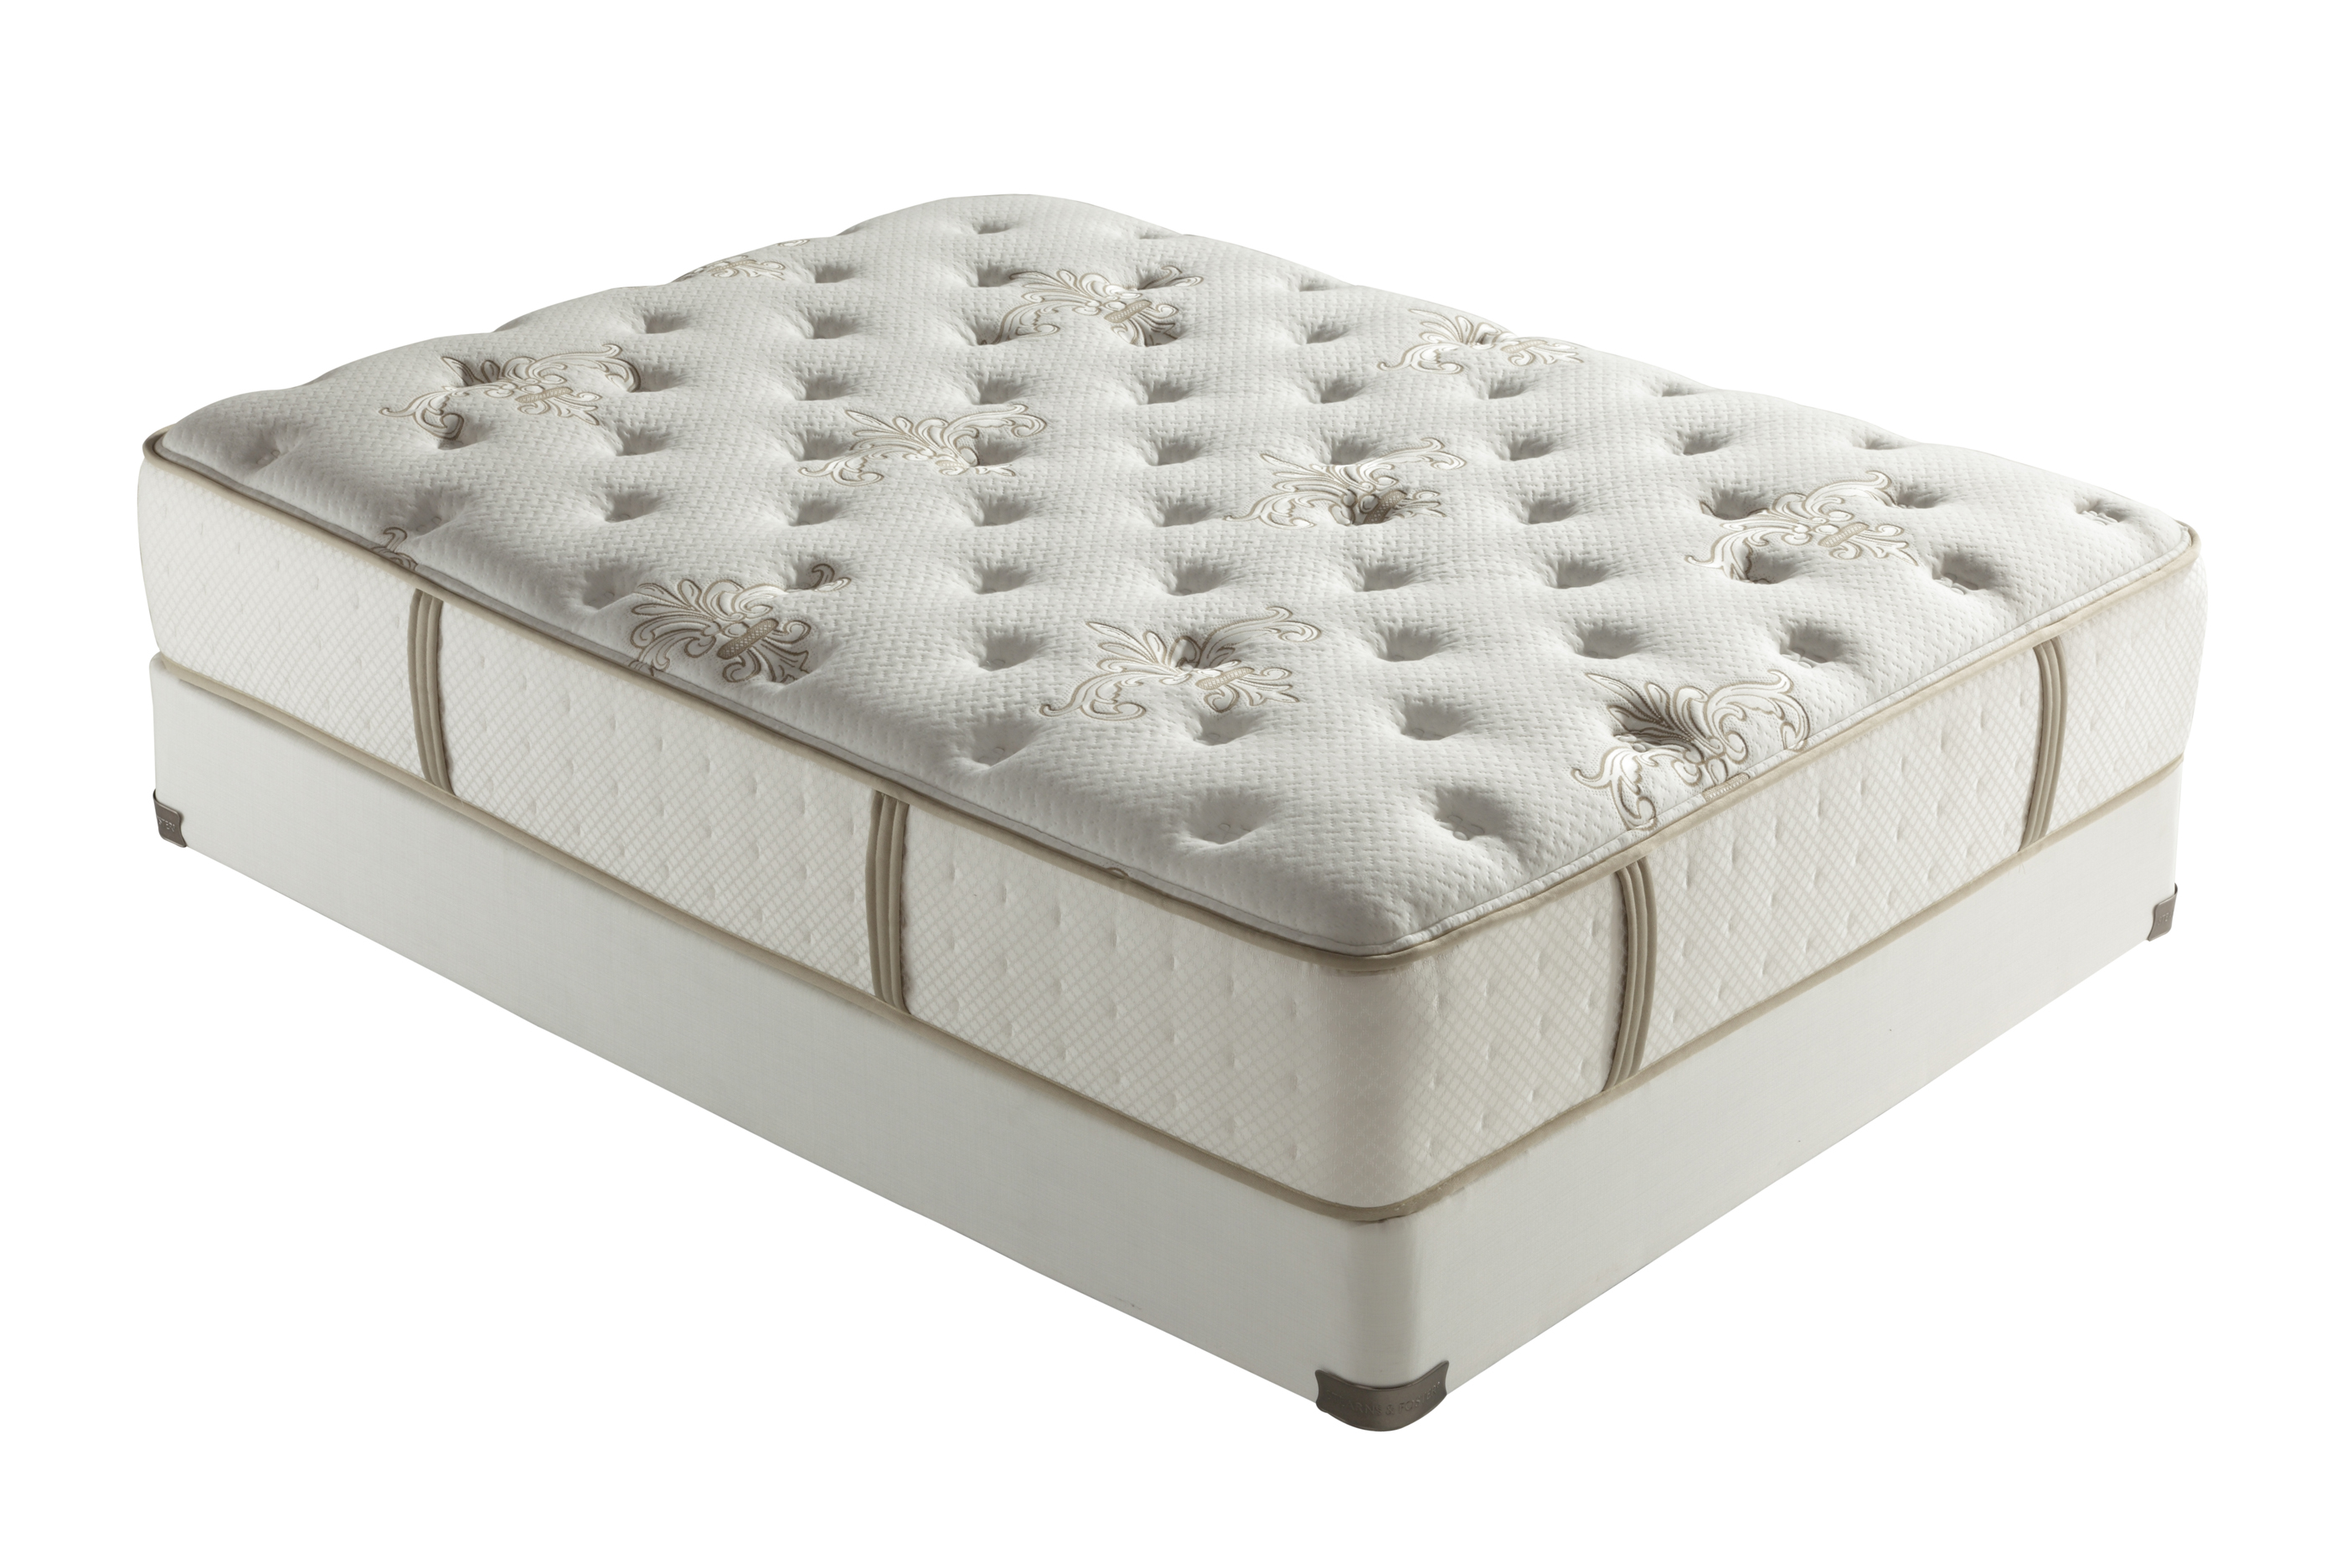 stearns and foster latex mattress prices